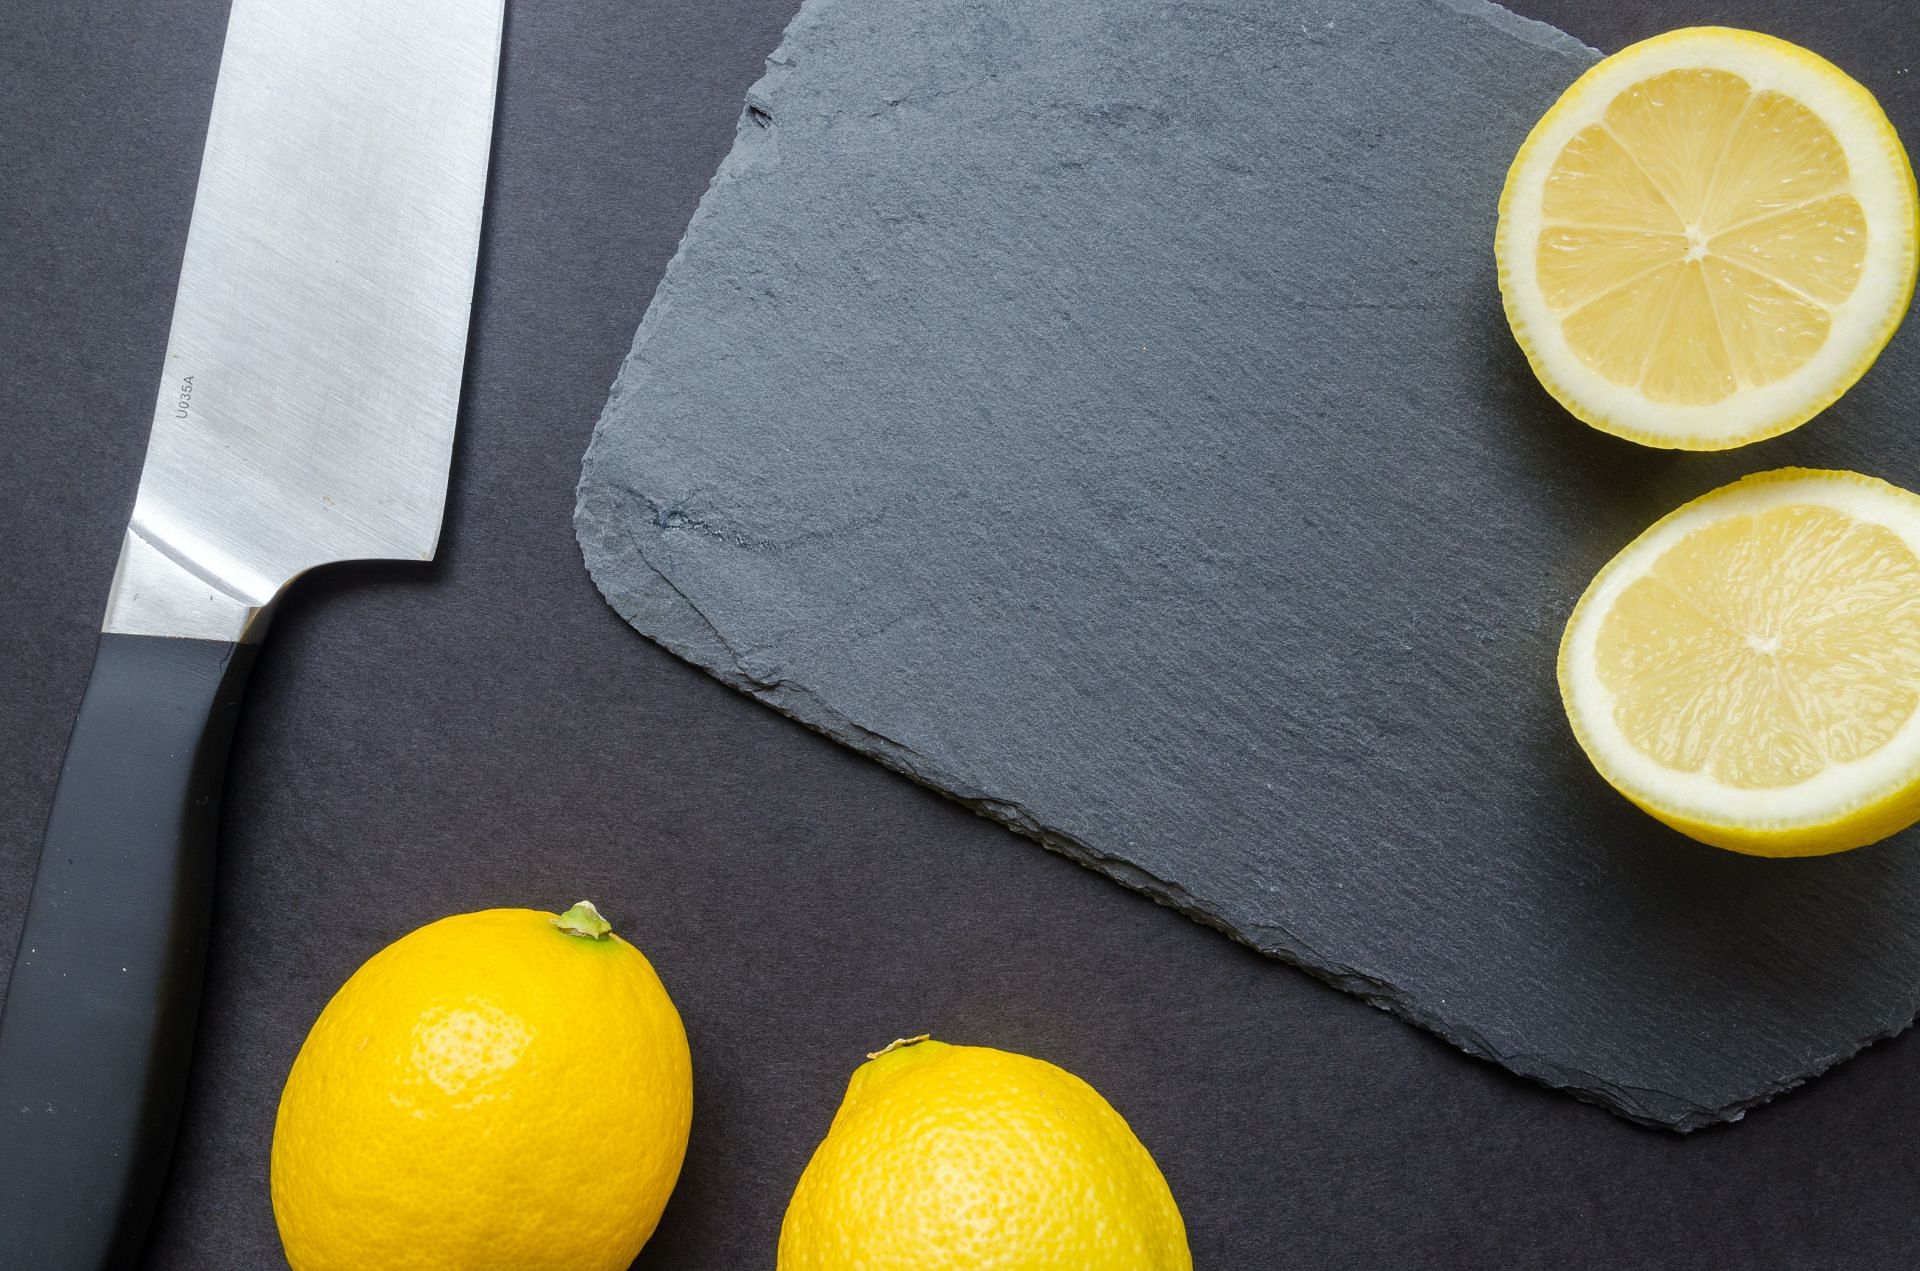 Slicing lemons releases the natural essential oils of it into the air, helping relieving nausea (Image via Pexels @Lukas)